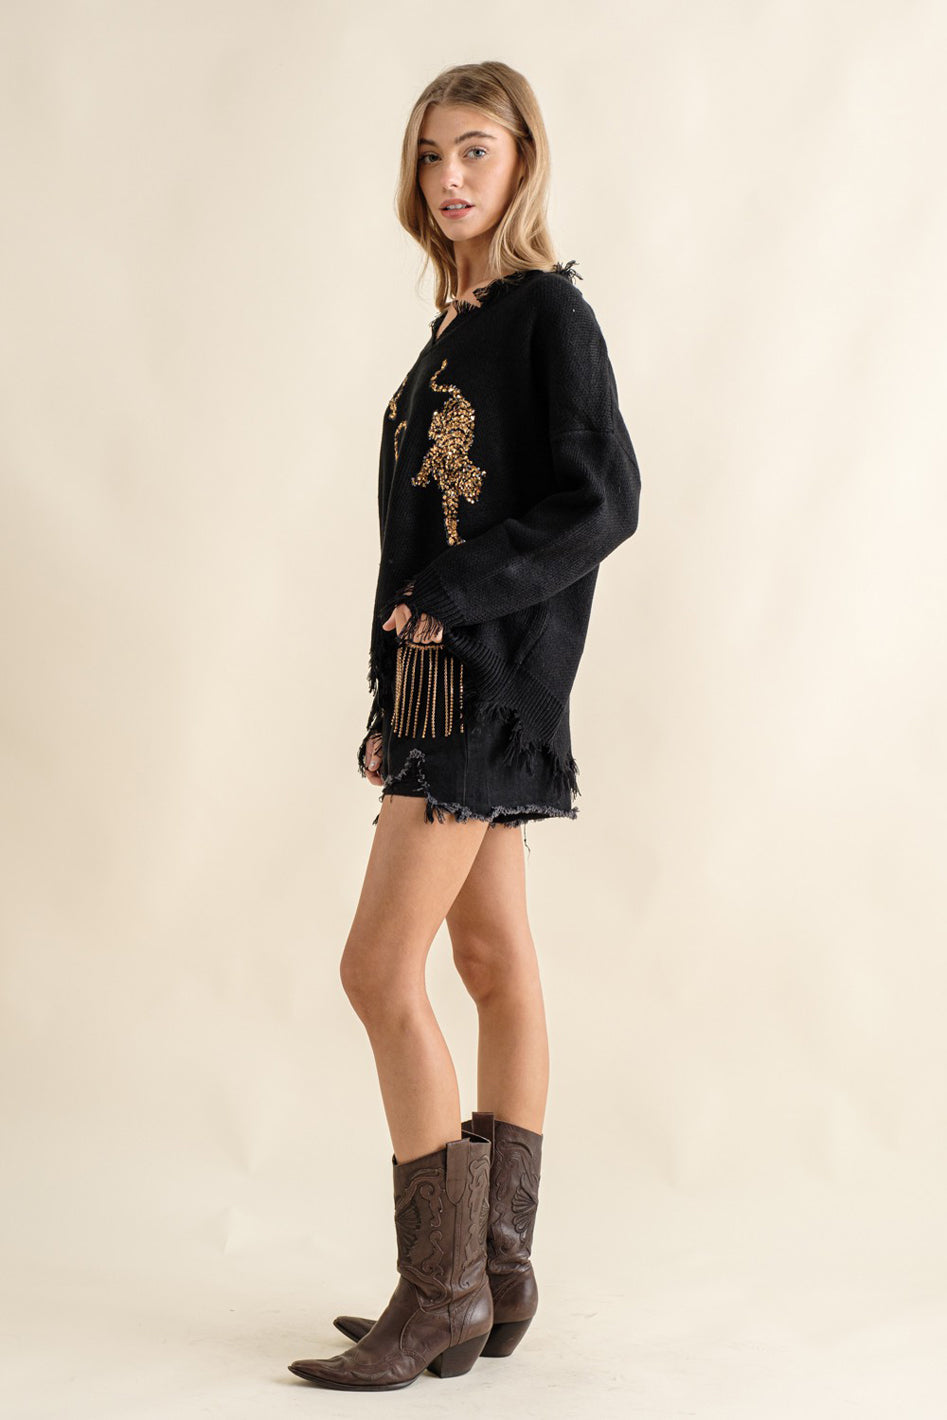 Frayed Edge Sequin Tiger Sweater - Azoroh